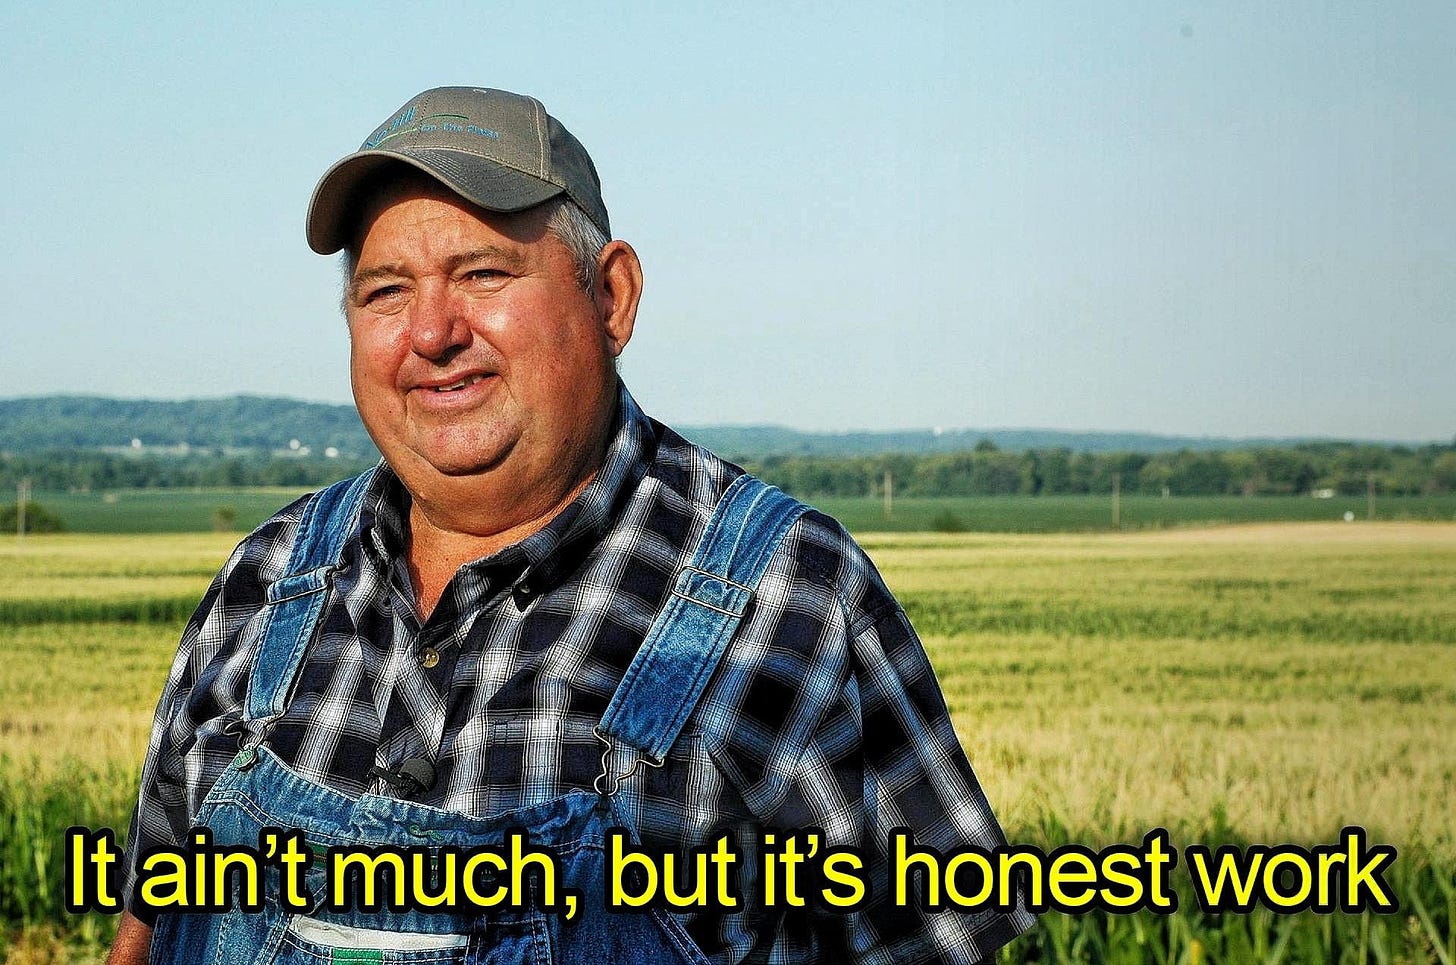 The meme of a farmer standing in front of a field stating "It ain't much, but it's honest work"